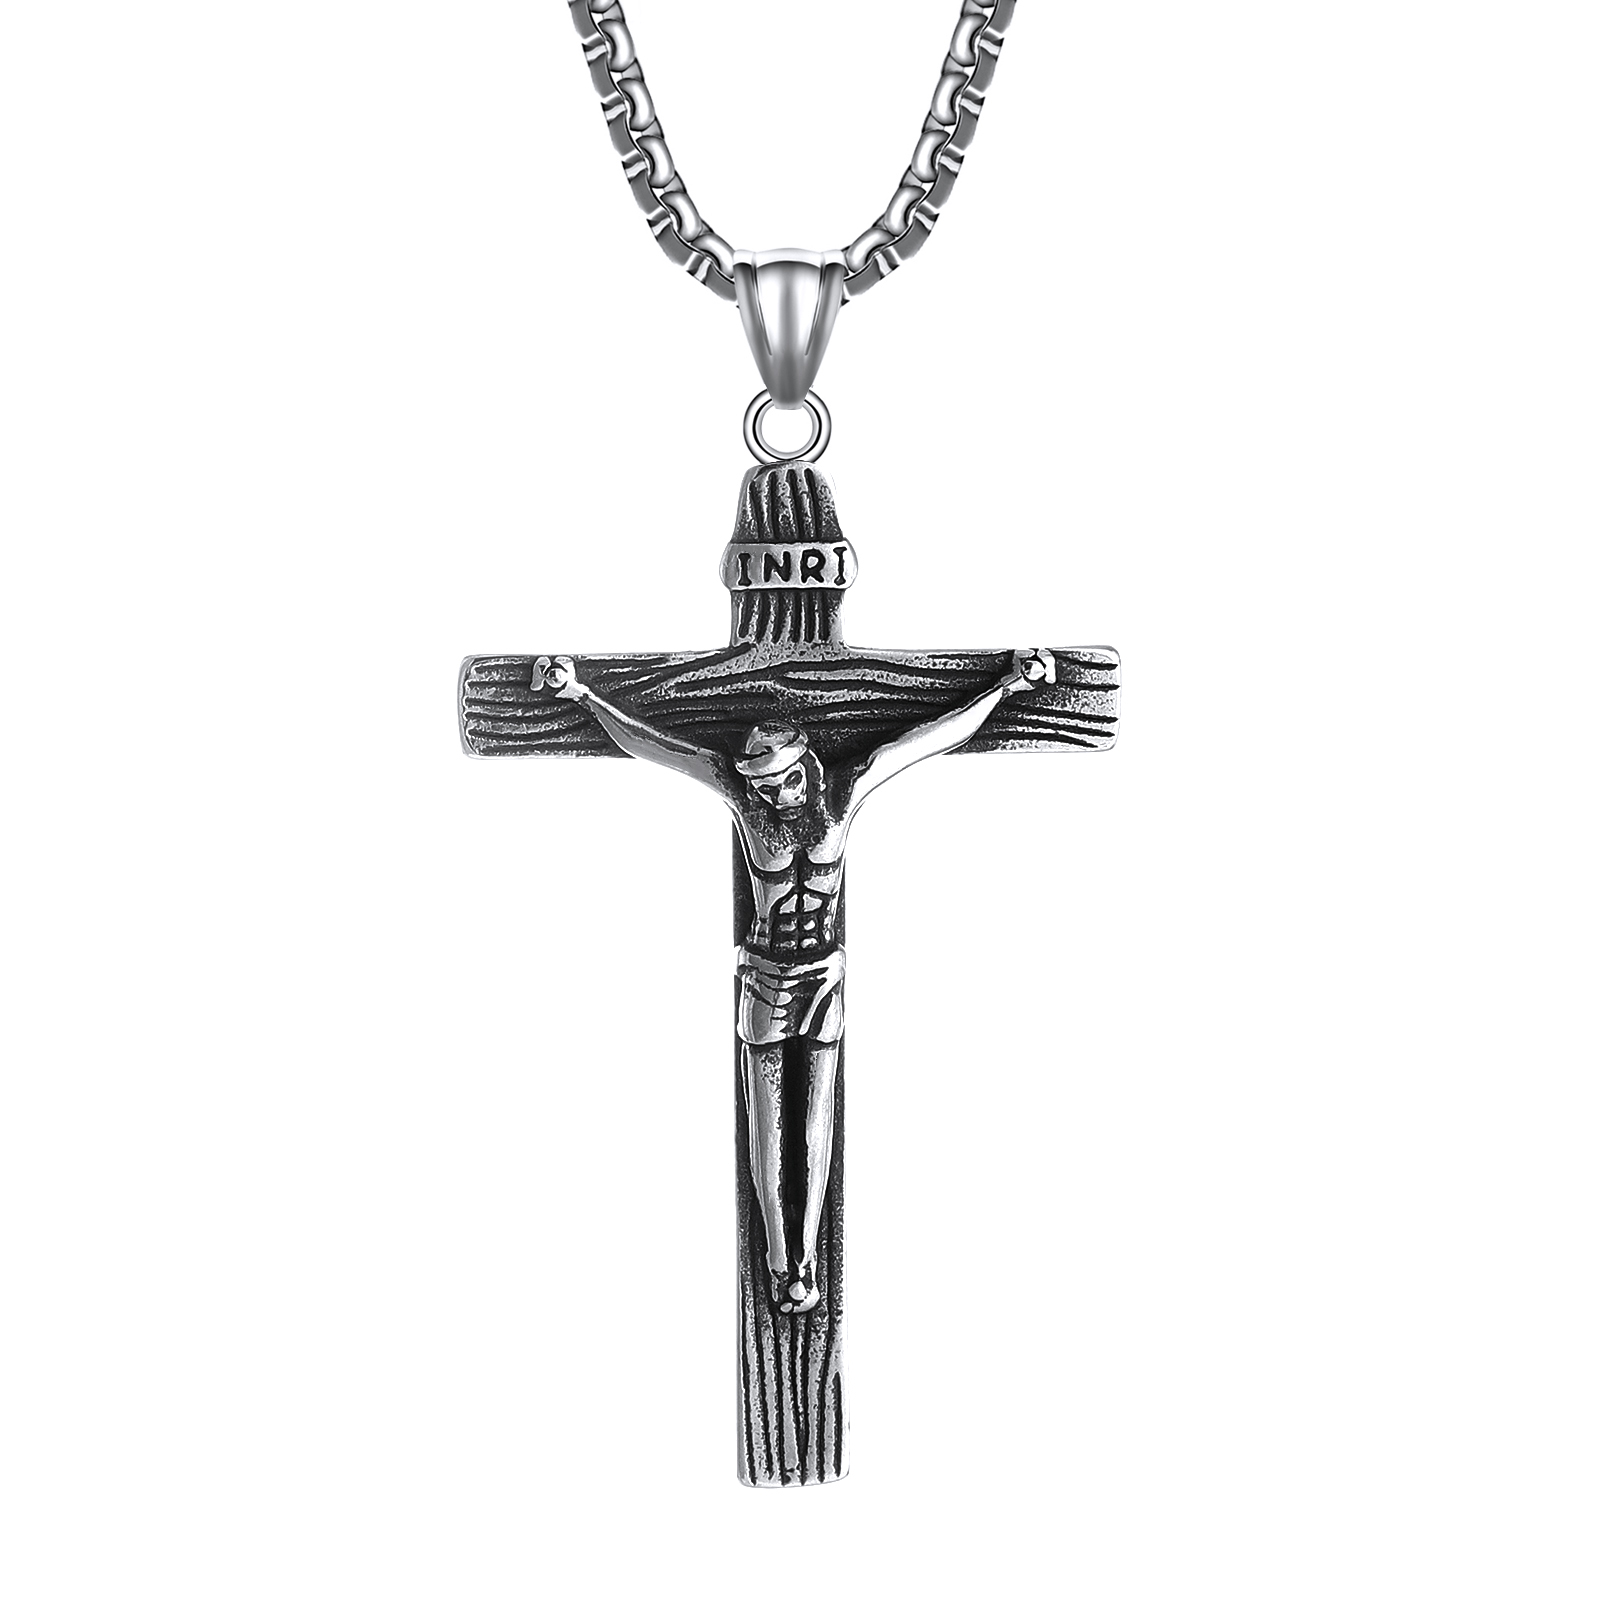 Men Crucifix Cross Pendant with 24 Chain Baptism Christian Religious Jewelry Stainless Steel Antique Silver Jesus Necklace Gift Package